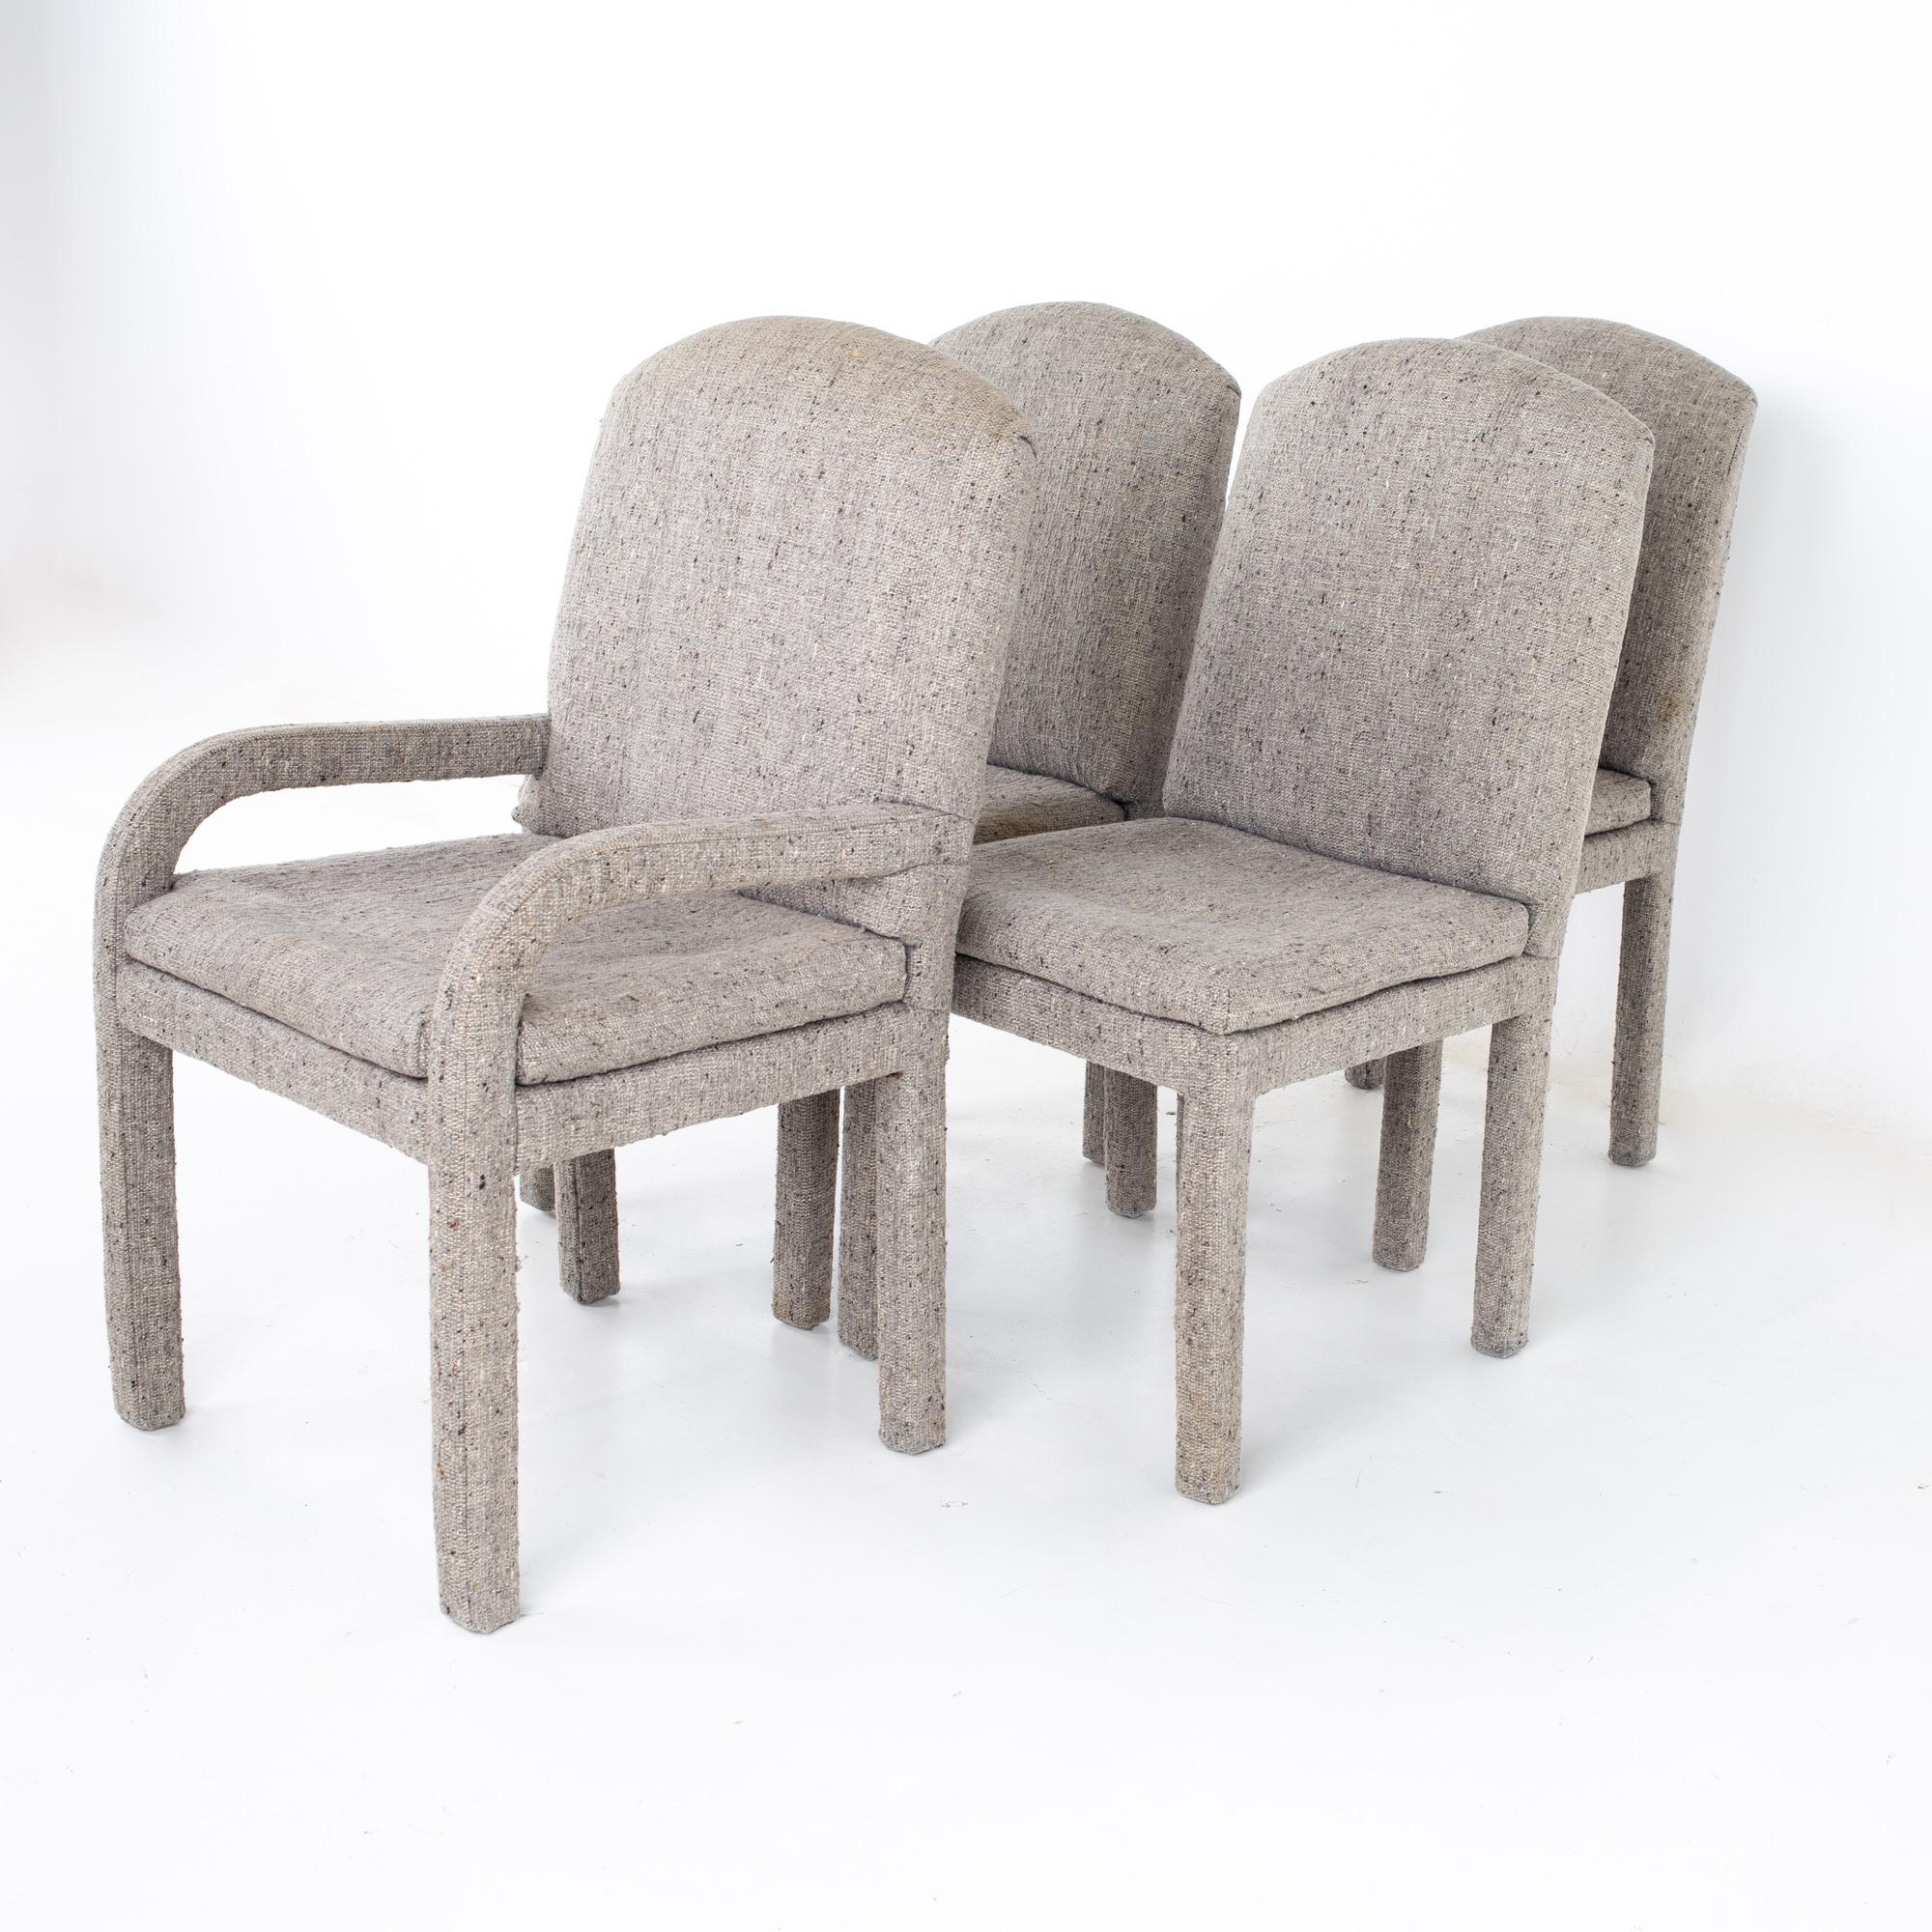 Milo Baughman style mid century grey Parsons chairs - Set of 4
Each chair measures: 22.25 wide x 23.5 deep x 40 high, with a seat height of 20 inches

All pieces of furniture can be had in what we call restored vintage condition. That means the